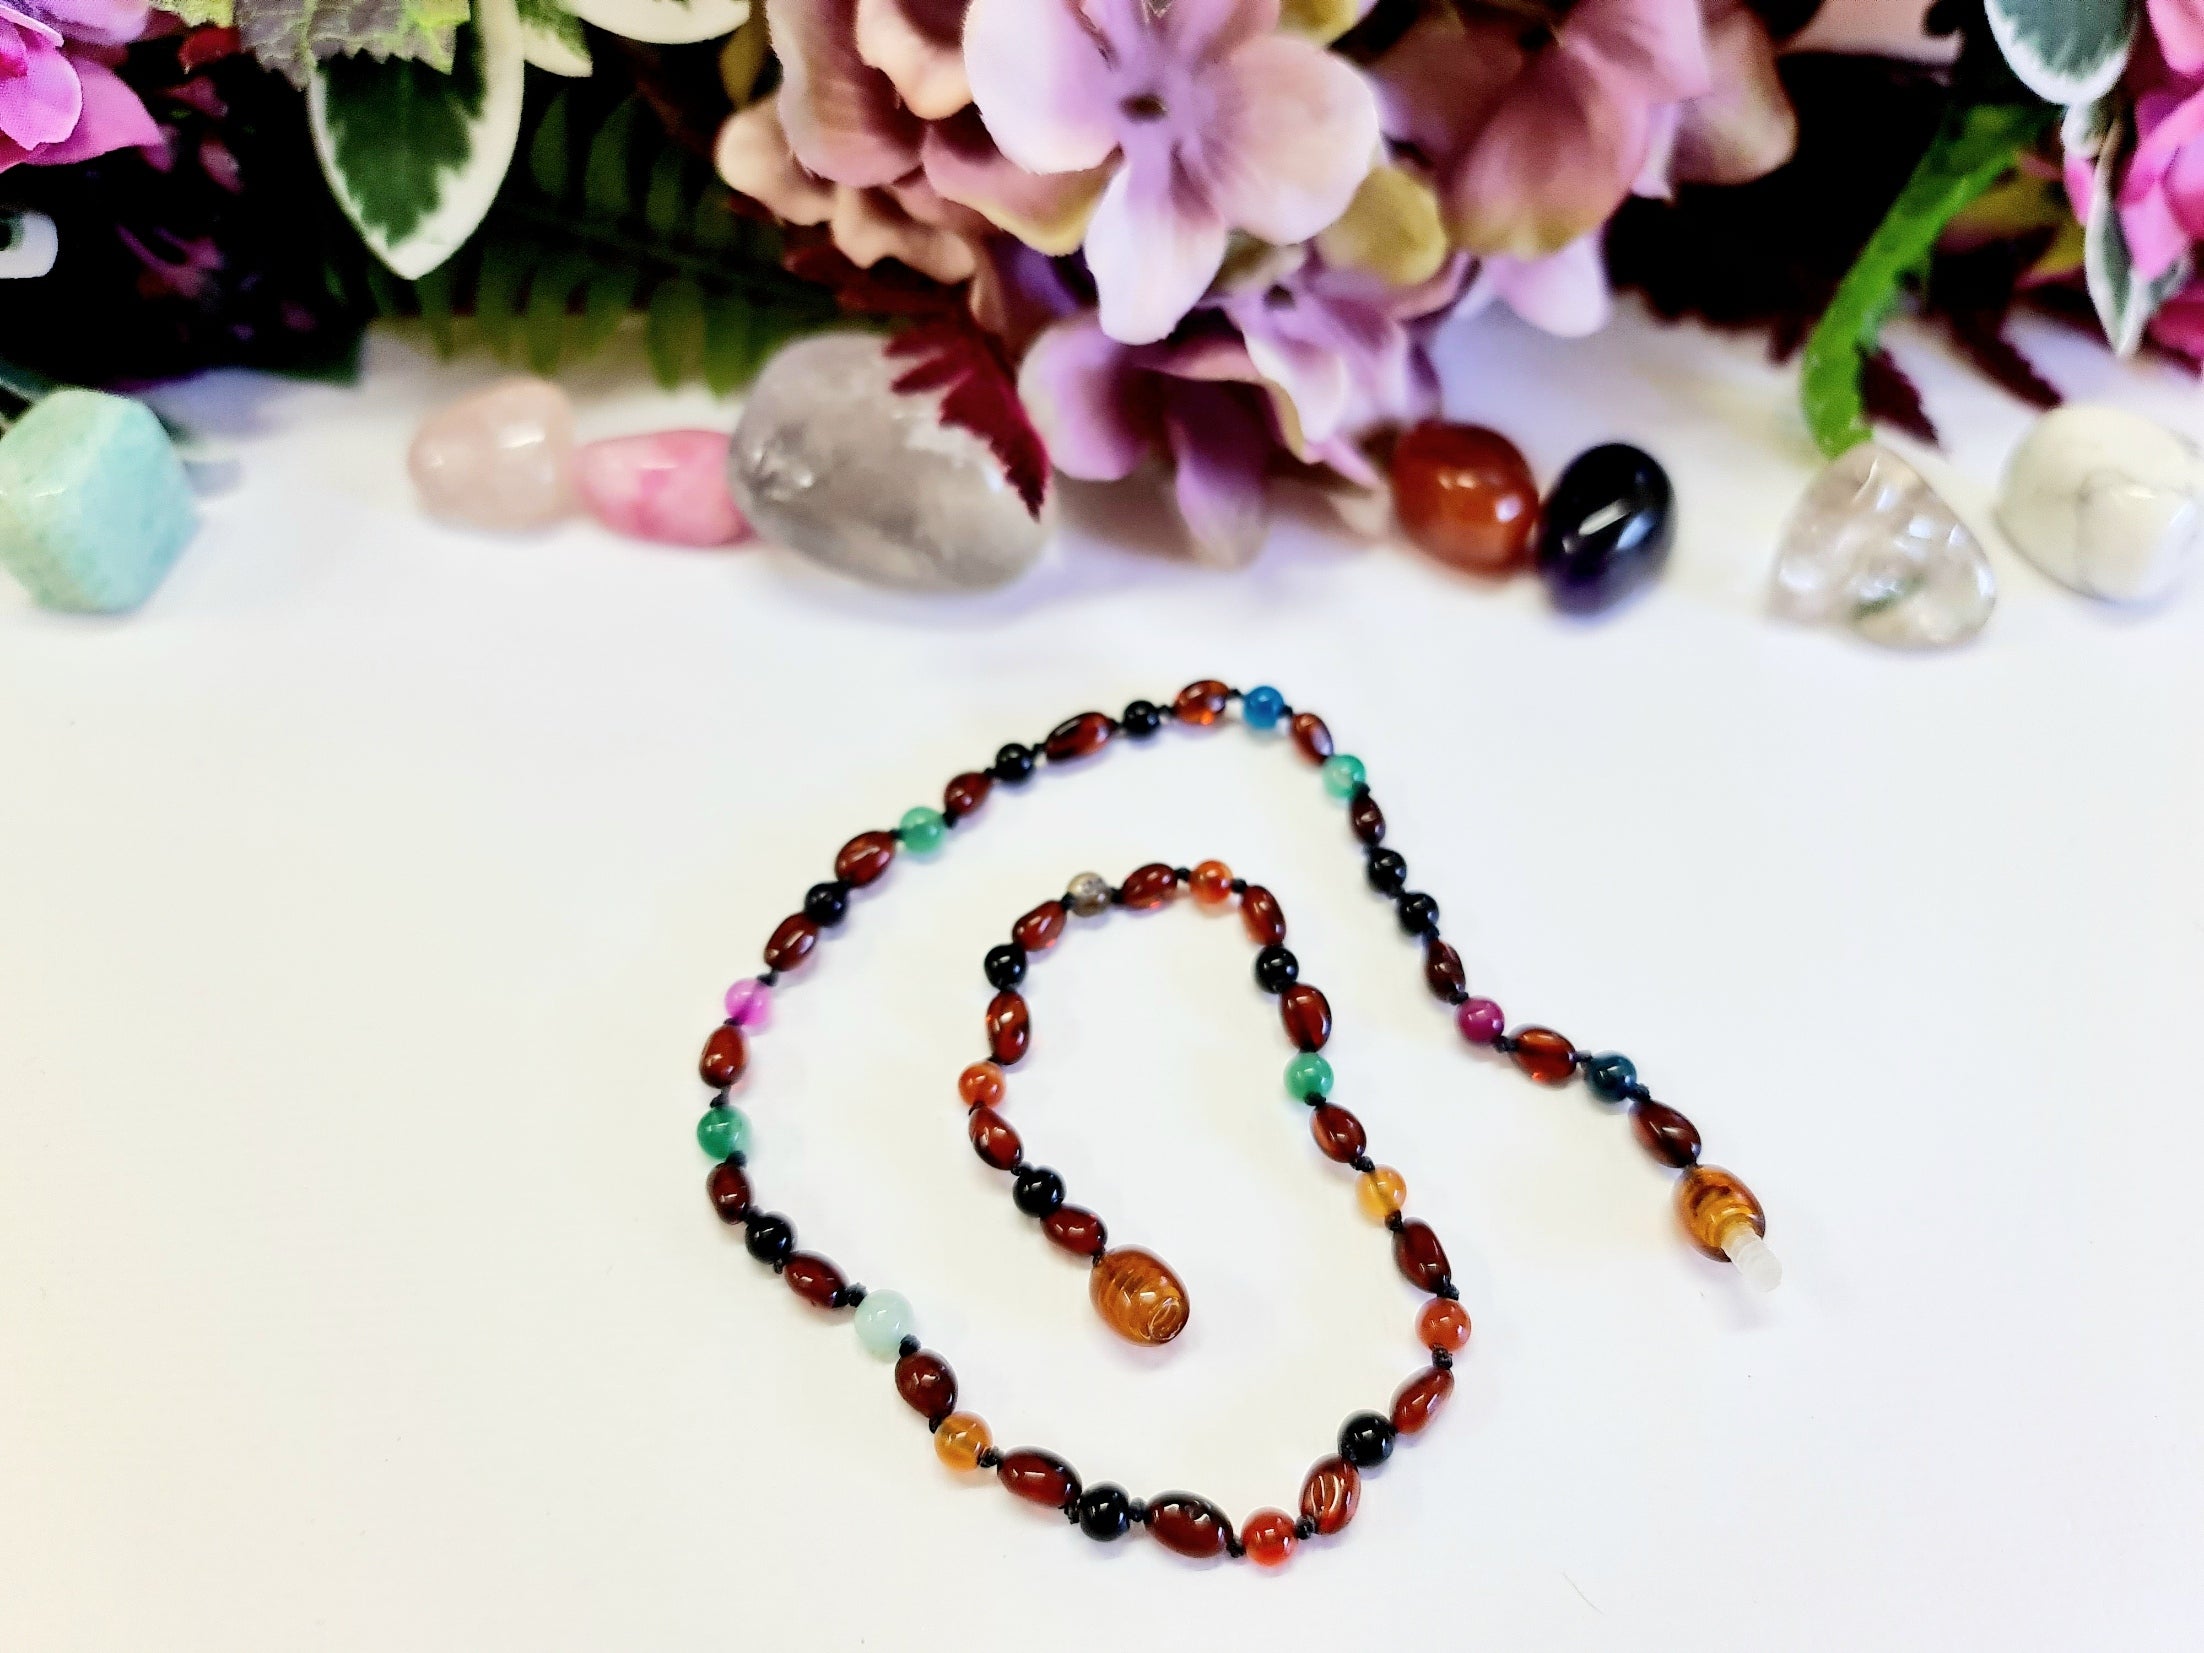 Small Bean-Shaped Dark Cognac with Mixed Striped Agate Necklace- 34cm